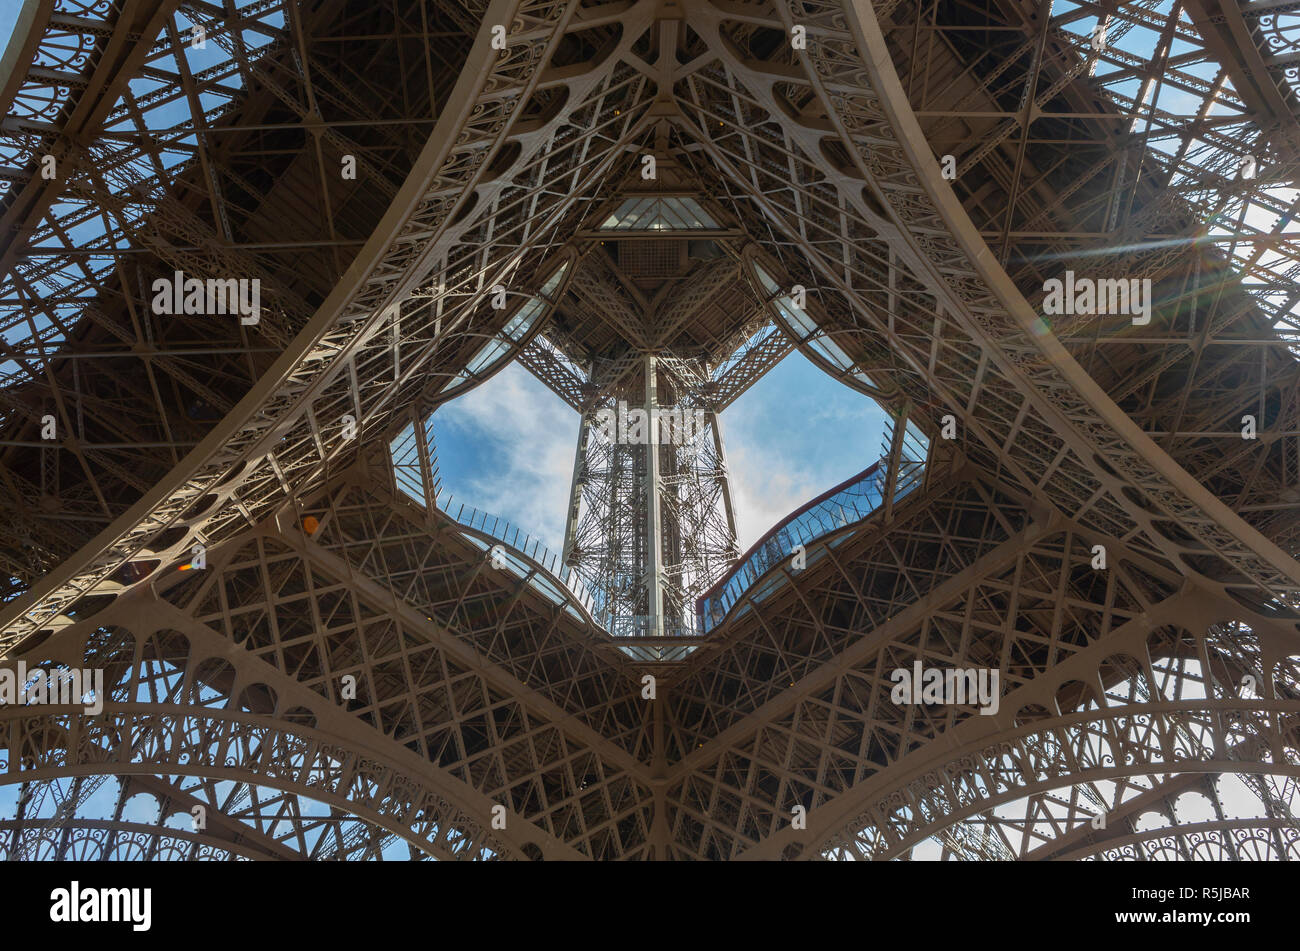 The Eiffel Tower, (looking upwards), is a wrought-iron lattice tower on the Champ de Mars in Paris, France. Stock Photo